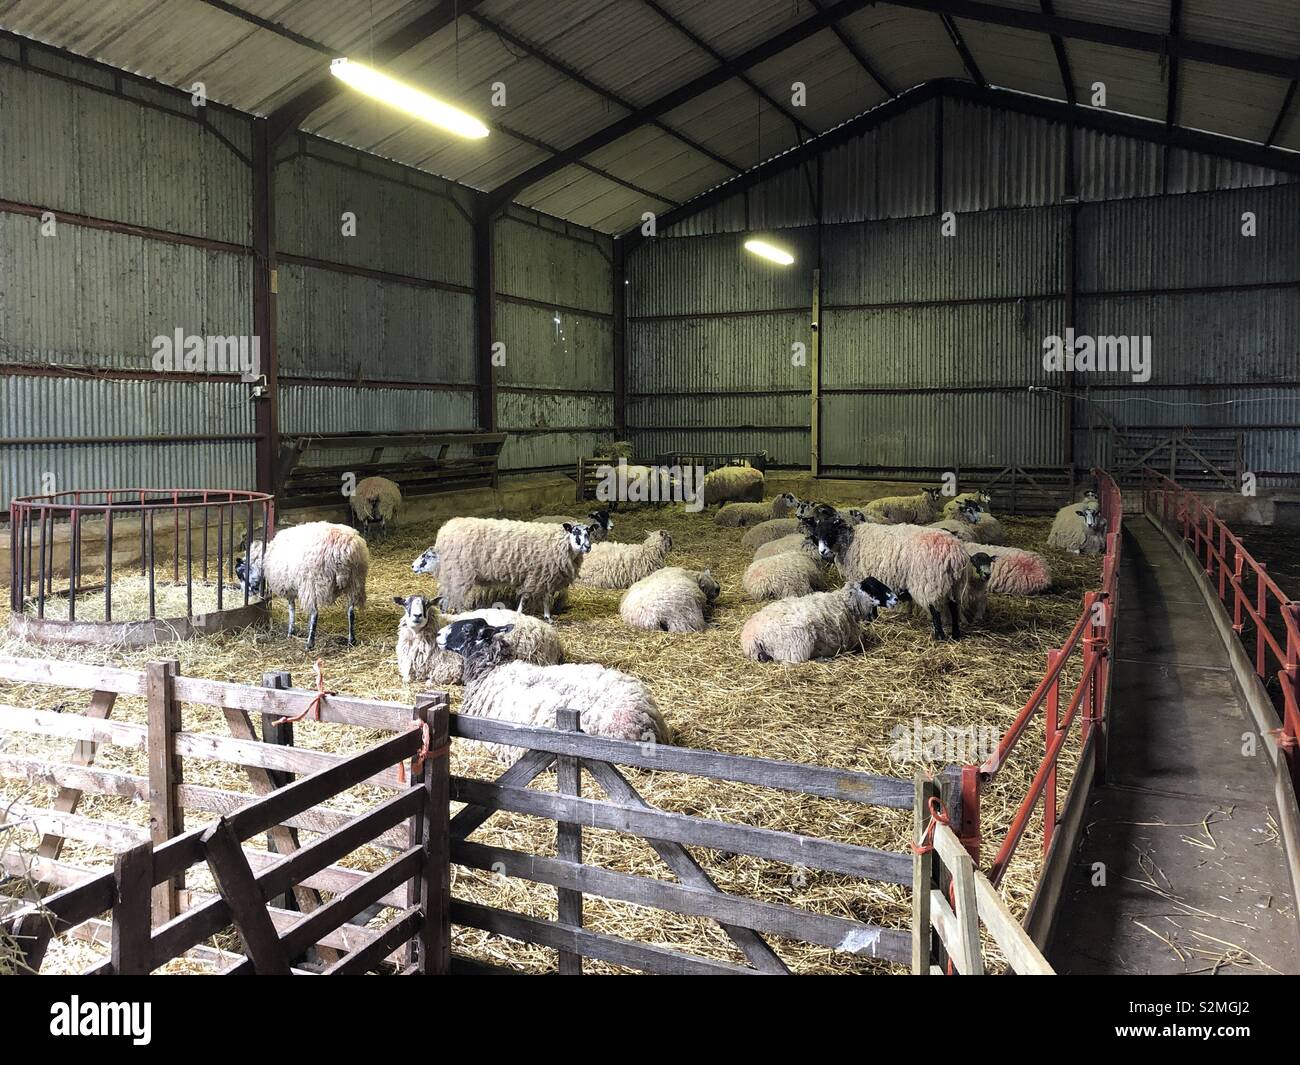 Pregnant ewes ready for lambing in a barn, United Kingdom Stock Photo